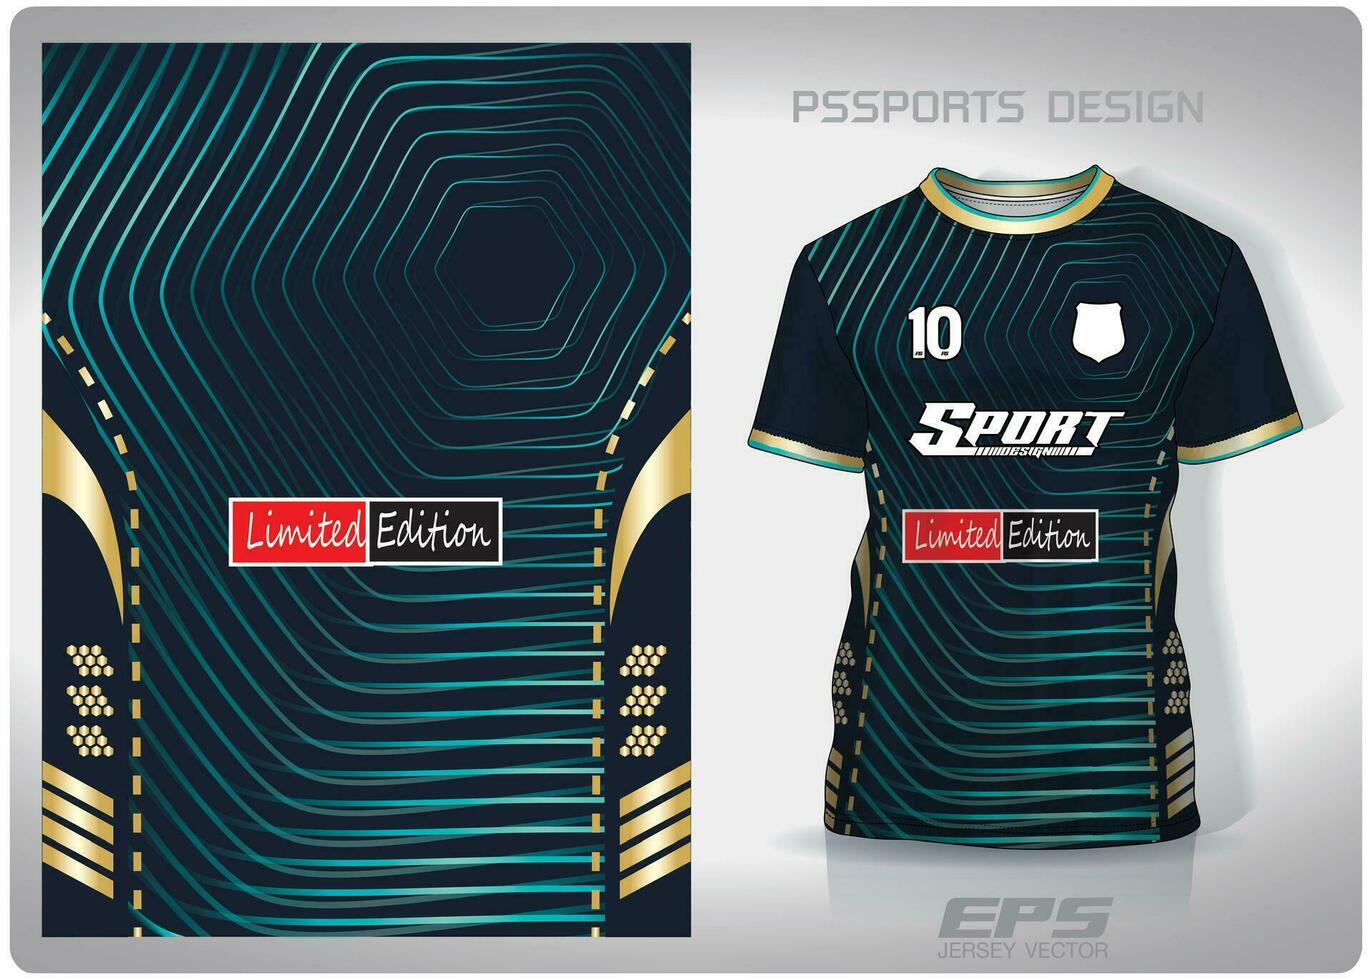 Pattern design, illustration, textile background for sports t-shirt, football jersey shirt mockup for football club. consistent front view vector